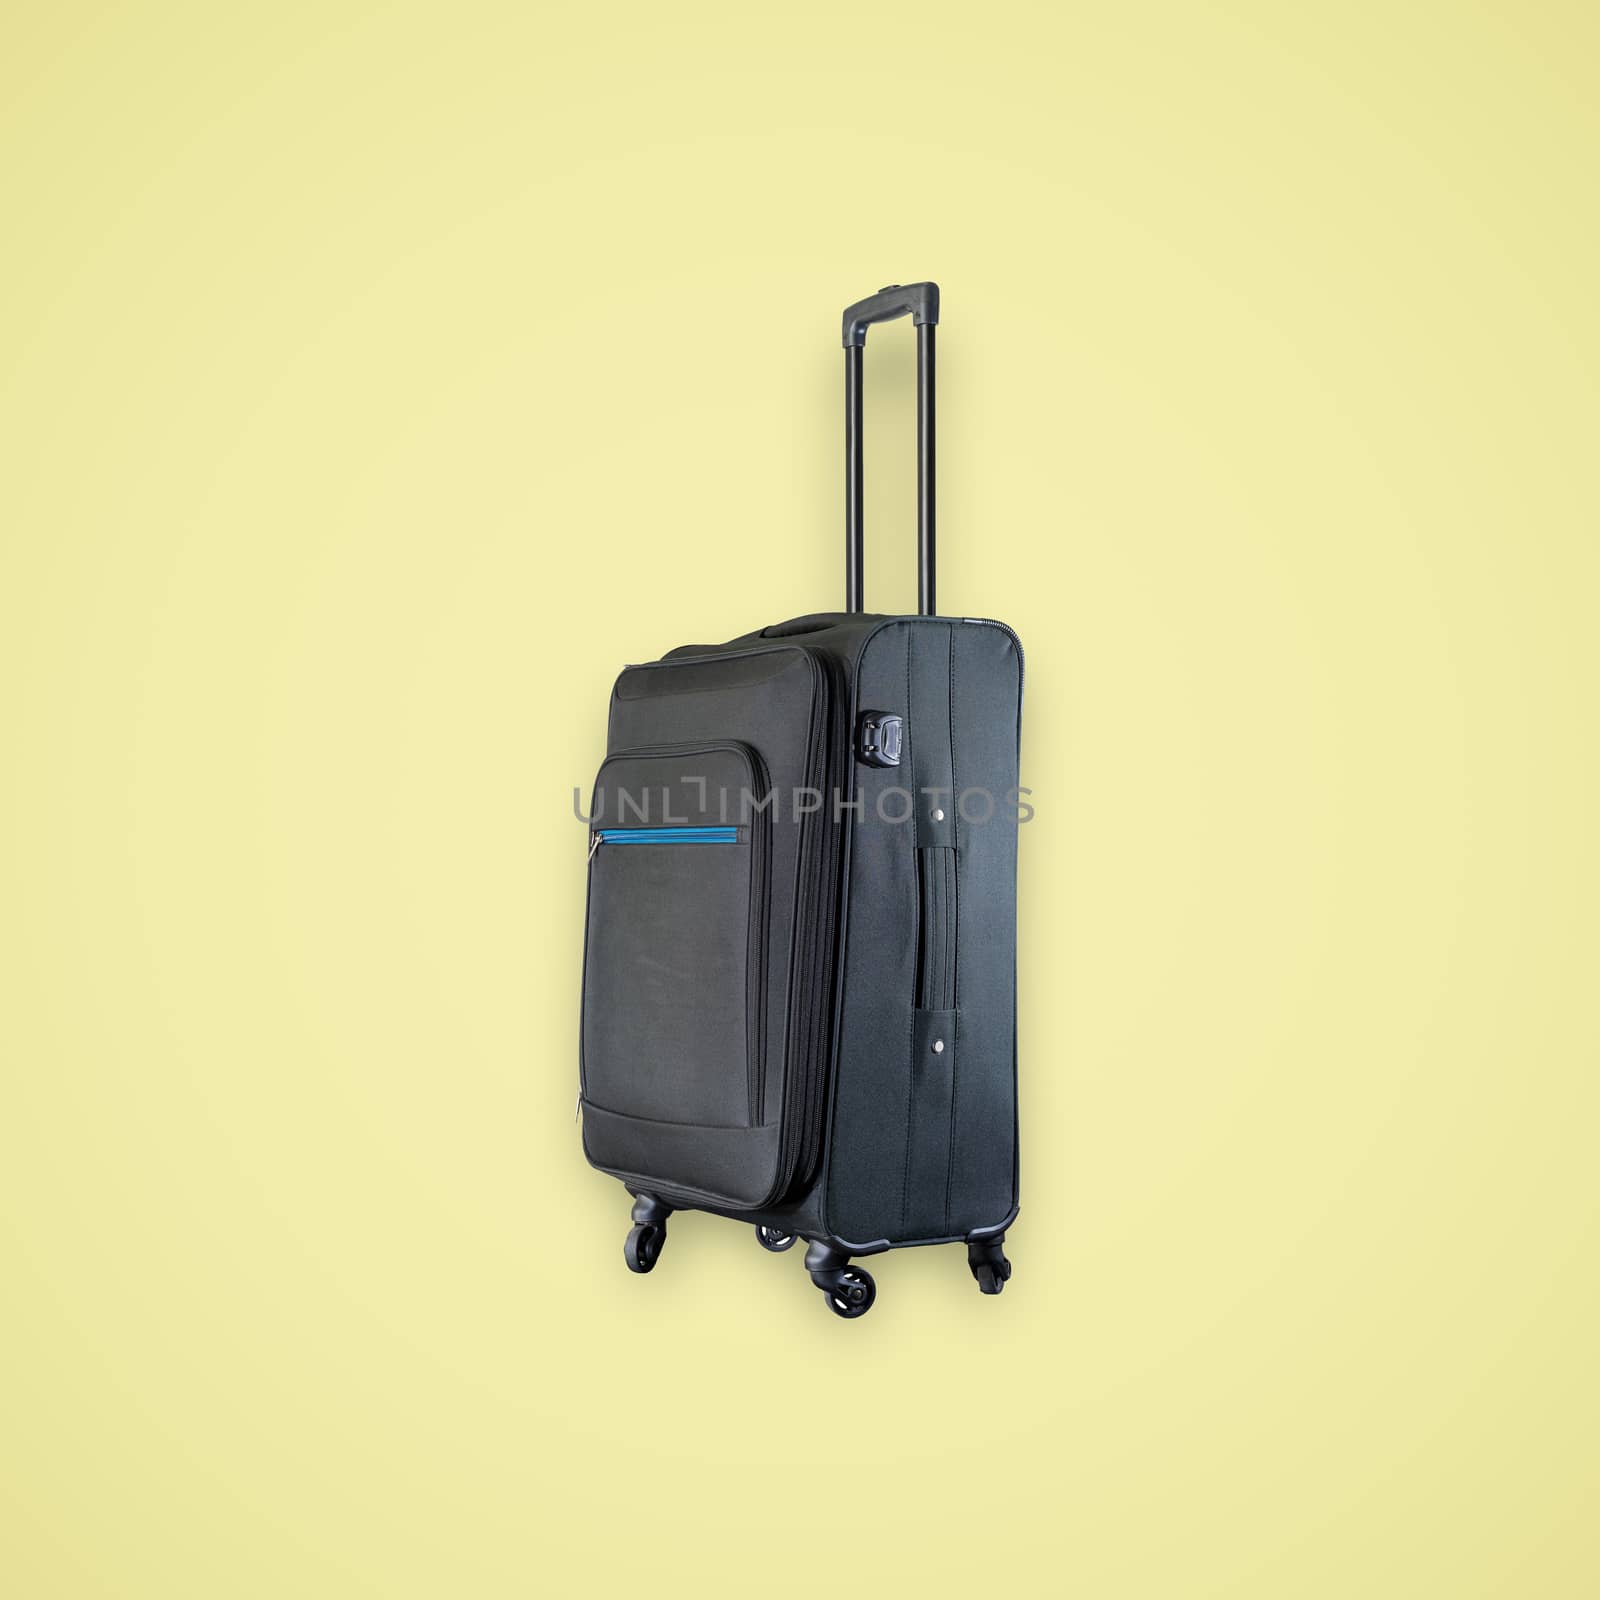 Black suitcase isolated on beautiful pastel color background, with clipping path.